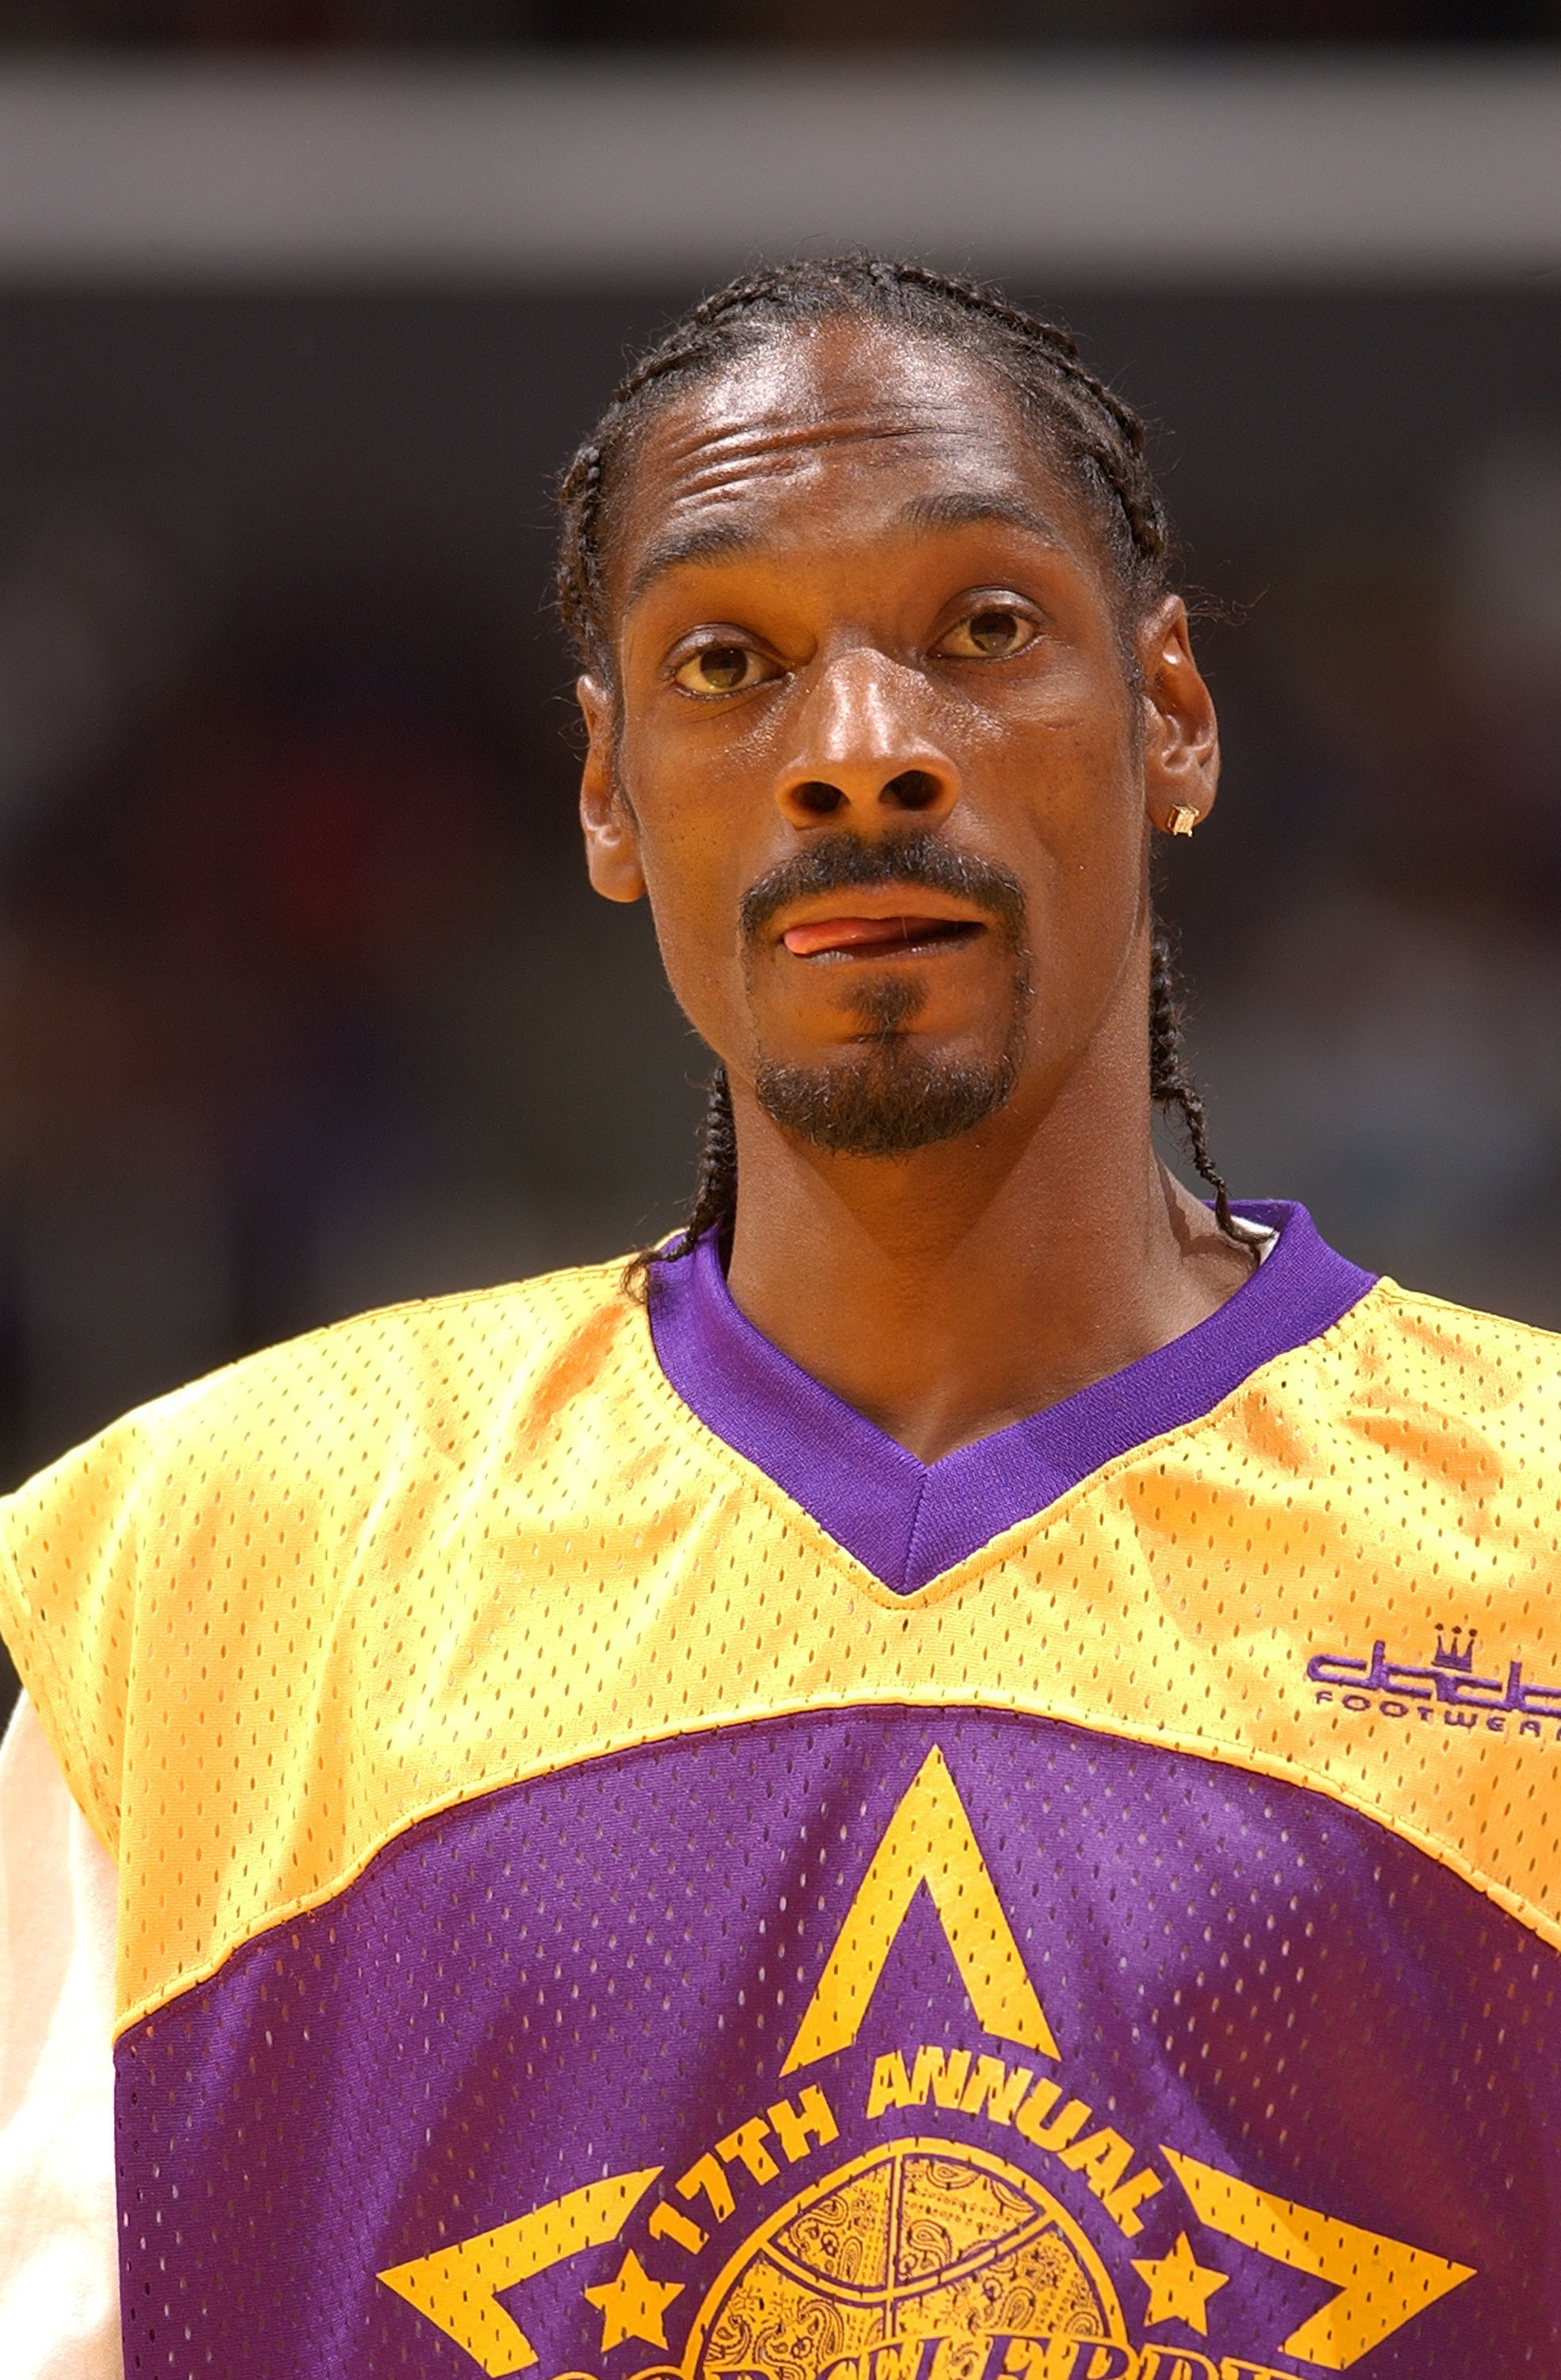 Snoop in a Lakers jersey